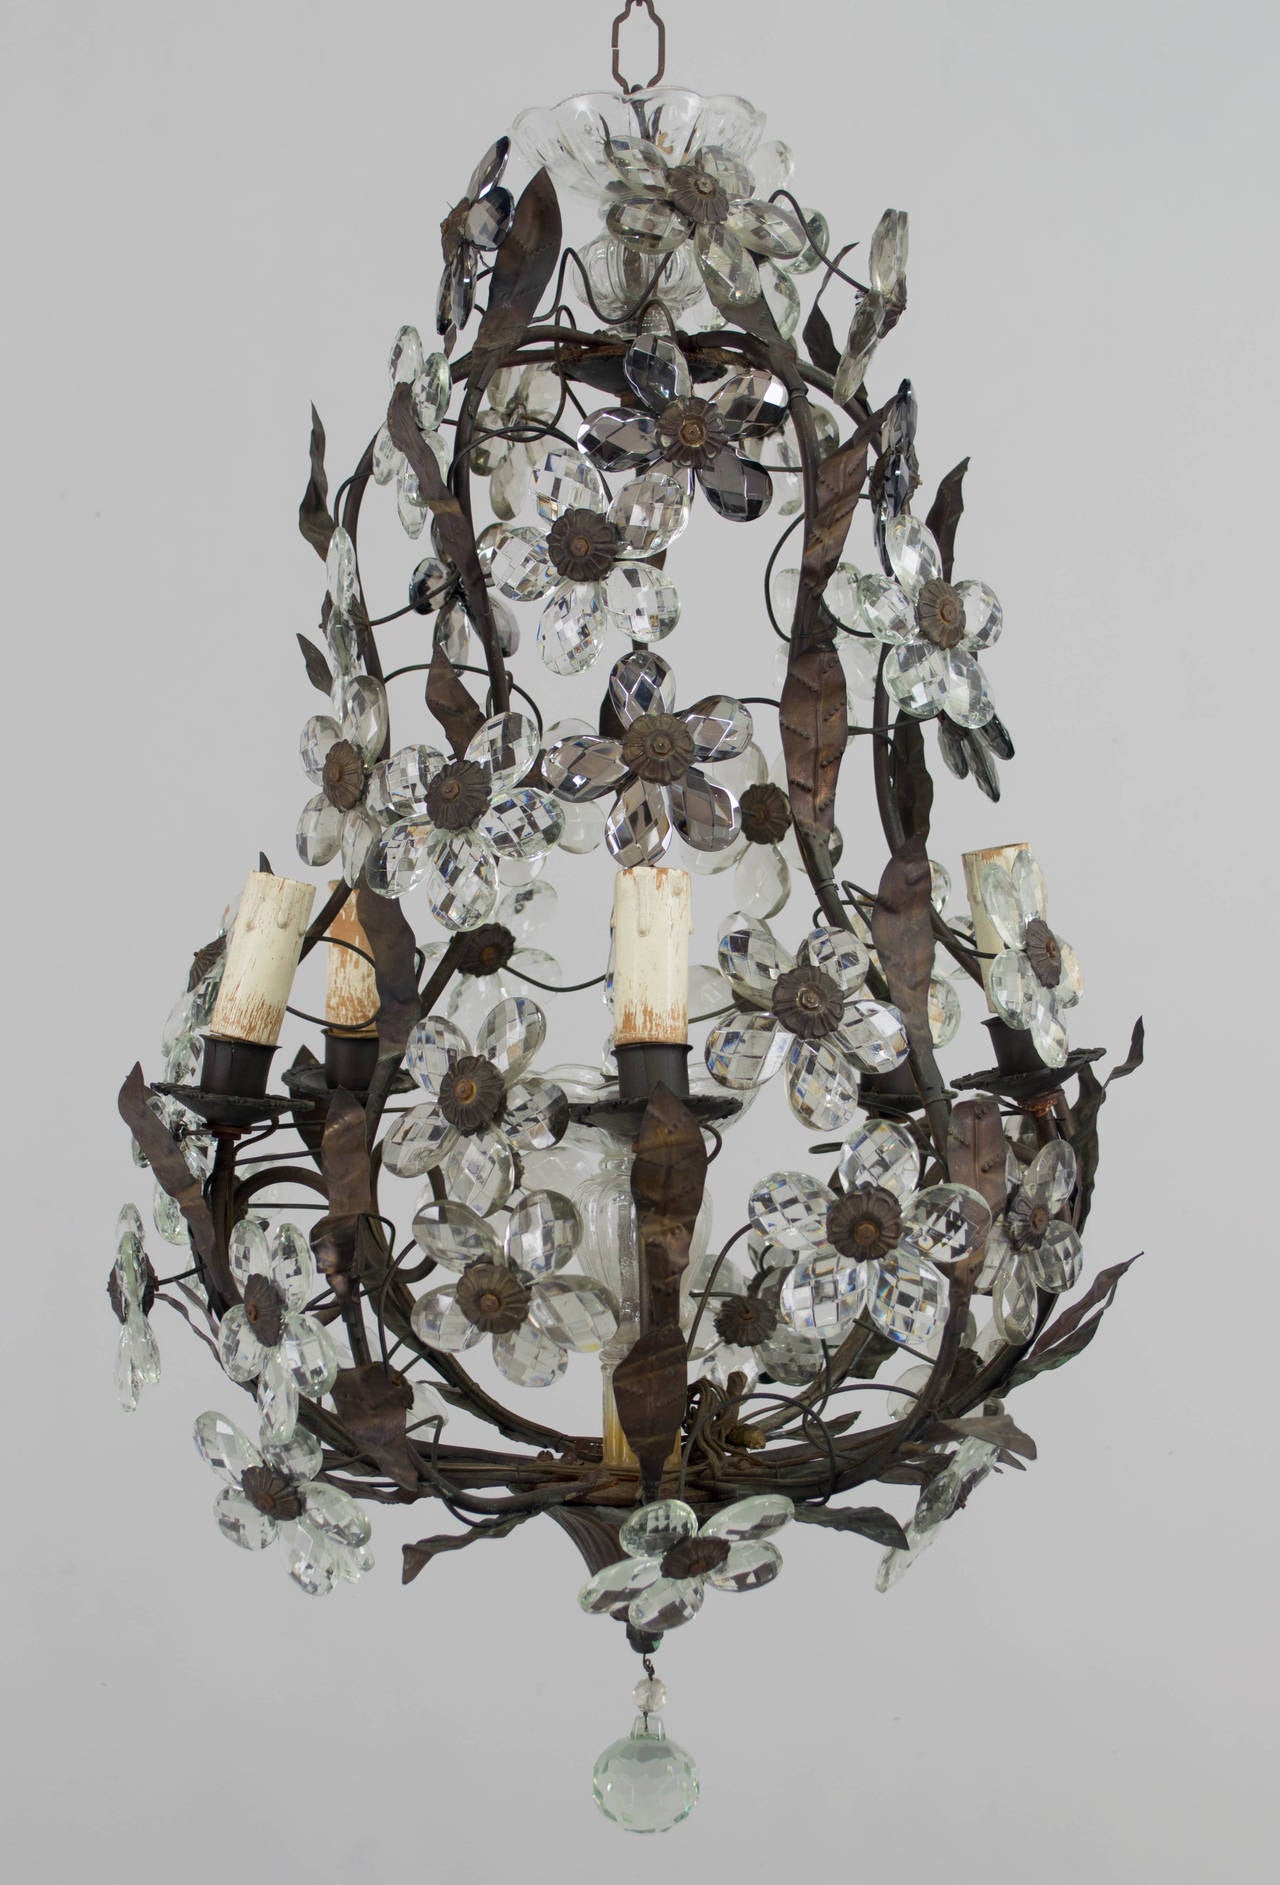 French six-light chandelier in the style of Maison Baguès, with faceted smoke glass prisms clustered into flower forms. Patinated brass, pear shaped frame with tole leaves. Height is 25.5